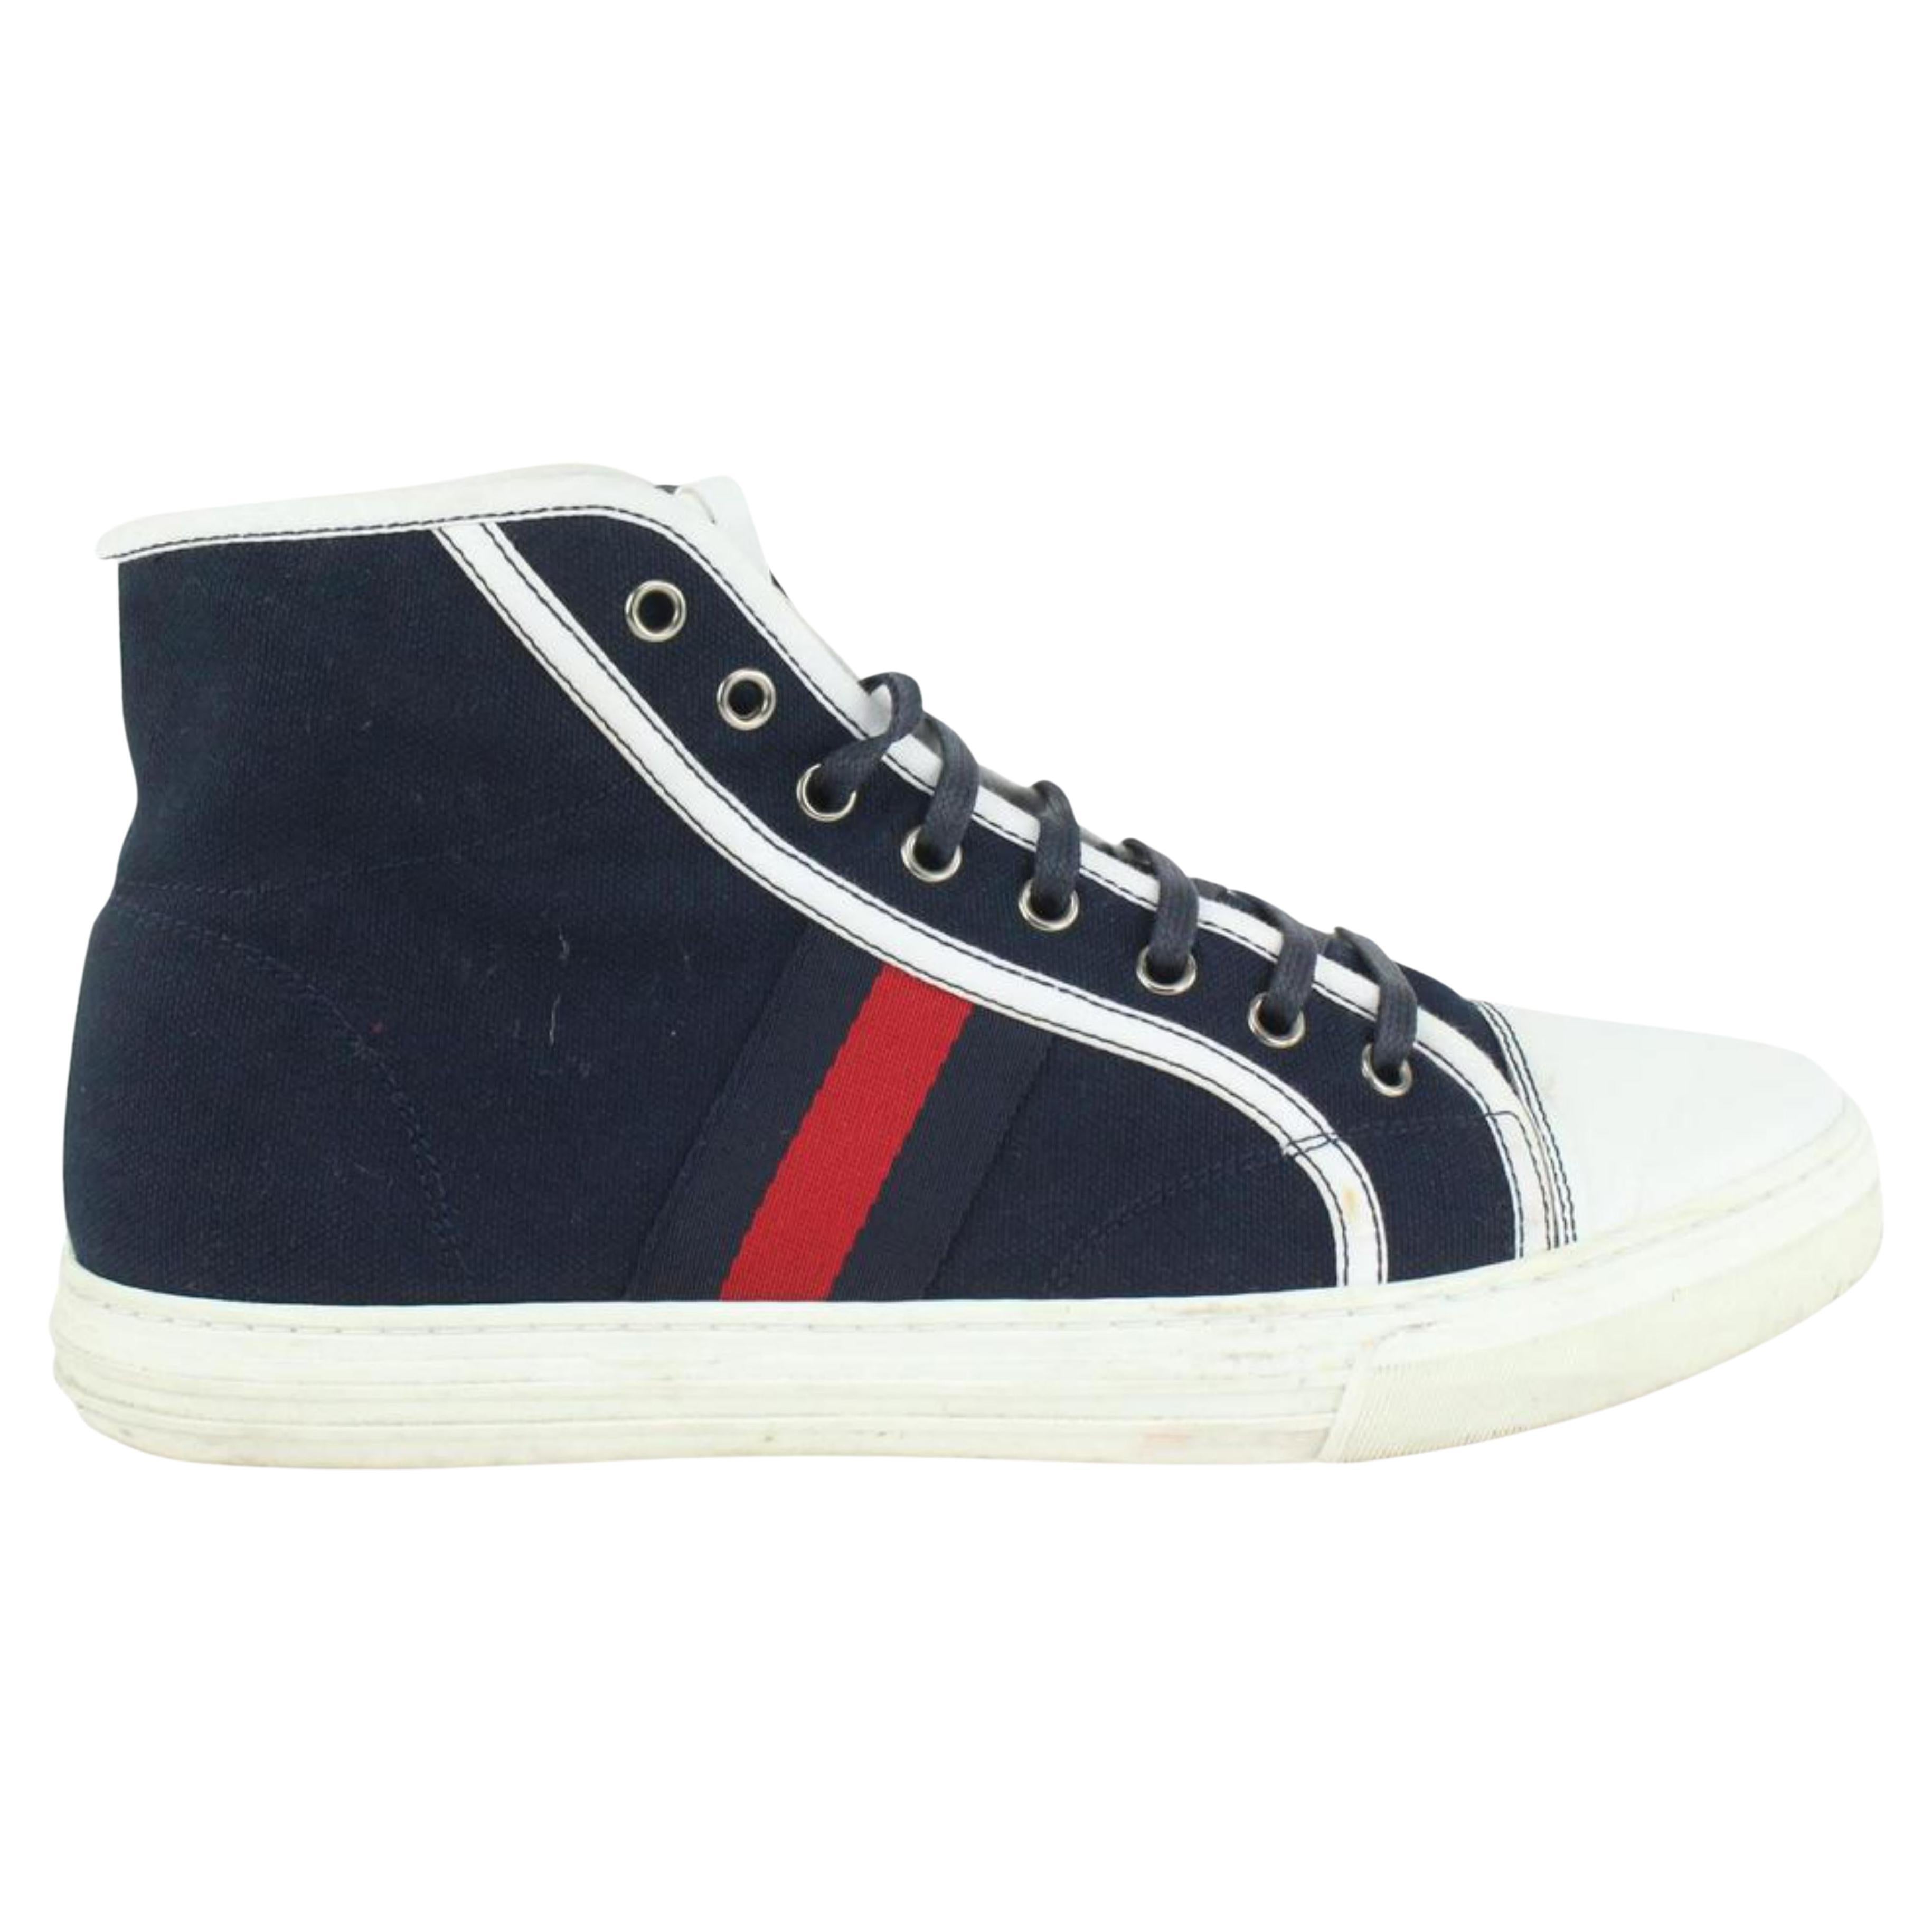 Gucci Men's US 8.5 Navy Monogram GG Web Sneakers 1123g40 For Sale